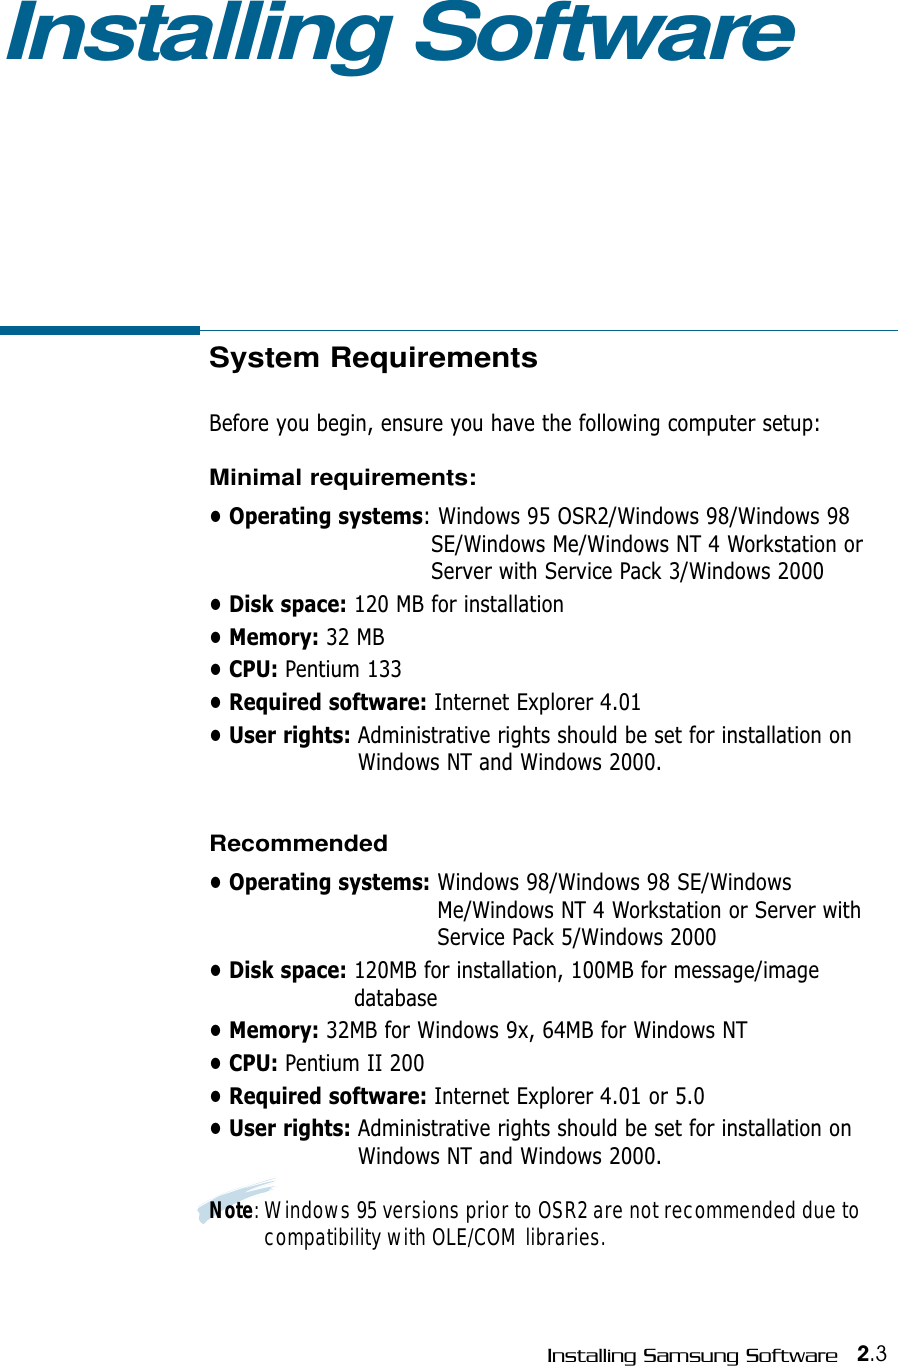 System RequirementsBefore you begin, ensure you have the following computer setup:Minimal requirements:• Operating systems: Windows 95 OSR2/Windows 98/Windows 98SE/Windows Me/Windows NT 4 Workstation orServer with Service Pack 3/Windows 2000• Disk space: 120 MB for installation • Memory: 32 MB • CPU: Pentium 133• Required software: Internet Explorer 4.01• User rights: Administrative rights should be set for installation onWindows NT and Windows 2000.Recommended• Operating systems: Windows 98/Windows 98 SE/WindowsMe/Windows NT 4 Workstation or Server withService Pack 5/Windows 2000• Disk space: 120MB for installation, 100MB for message/imagedatabase• Memory: 32MB for Windows 9x, 64MB for Windows NT• CPU: Pentium II 200• Required software: Internet Explorer 4.01 or 5.0• User rights: Administrative rights should be set for installation onWindows NT and Windows 2000.Note: Windows 95 versions prior to OSR2 are not recommended due tocompatibility with OLE/COM libraries.2.3Installing Samsung SoftwareInstalling Software